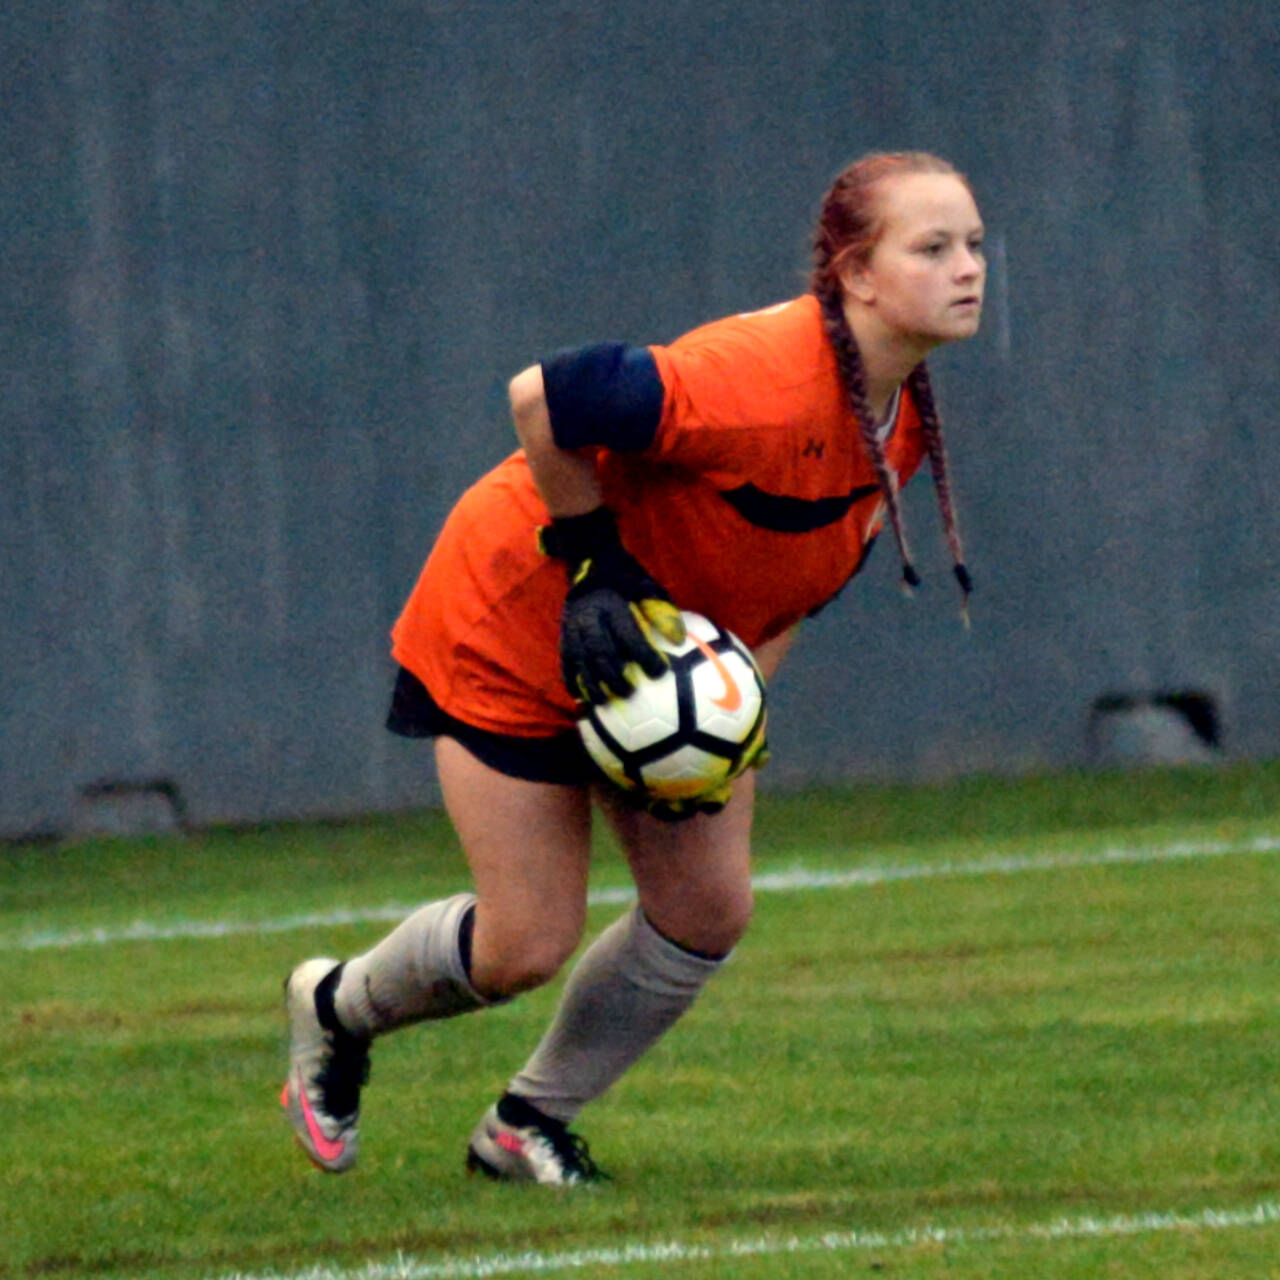 DAILY WORLD FILE PHOTO Ocosta goal keeper Amelia Saunders, seen here in a file photo from Sept. 28, recorded her fourth consecutive shutout with a 1-0 win over Forks on Monday in Forks.